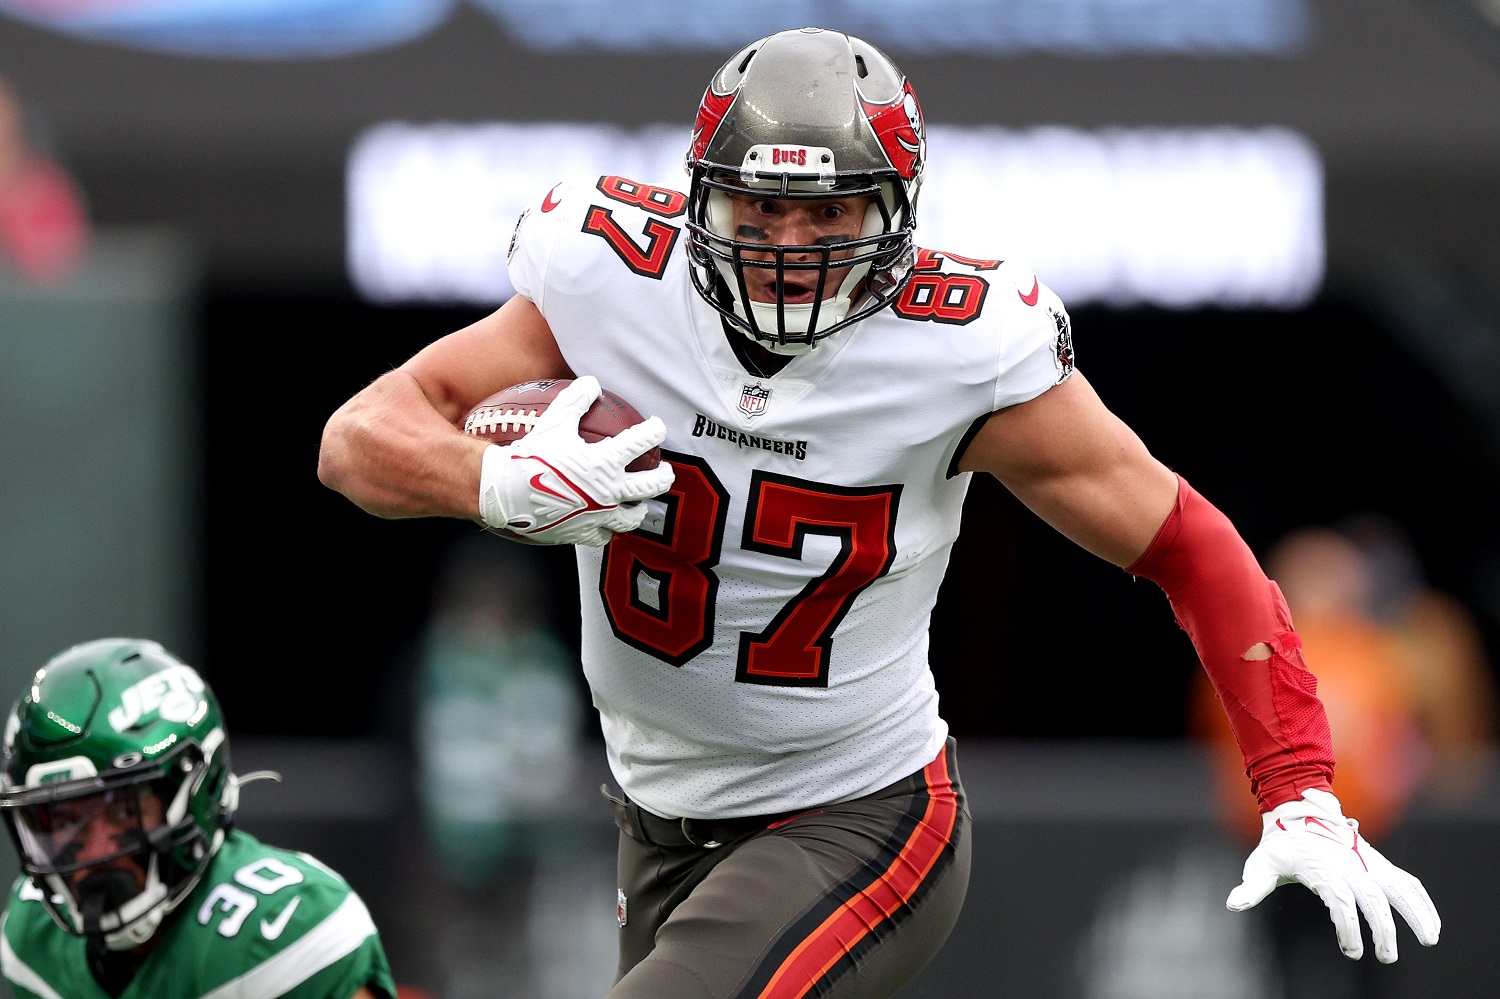 Rob Gronkowski of the Tampa Bay Buccaneers carries the ball against the New York Jets on Jan. 2, 2022, in East Rutherford, New Jersey.